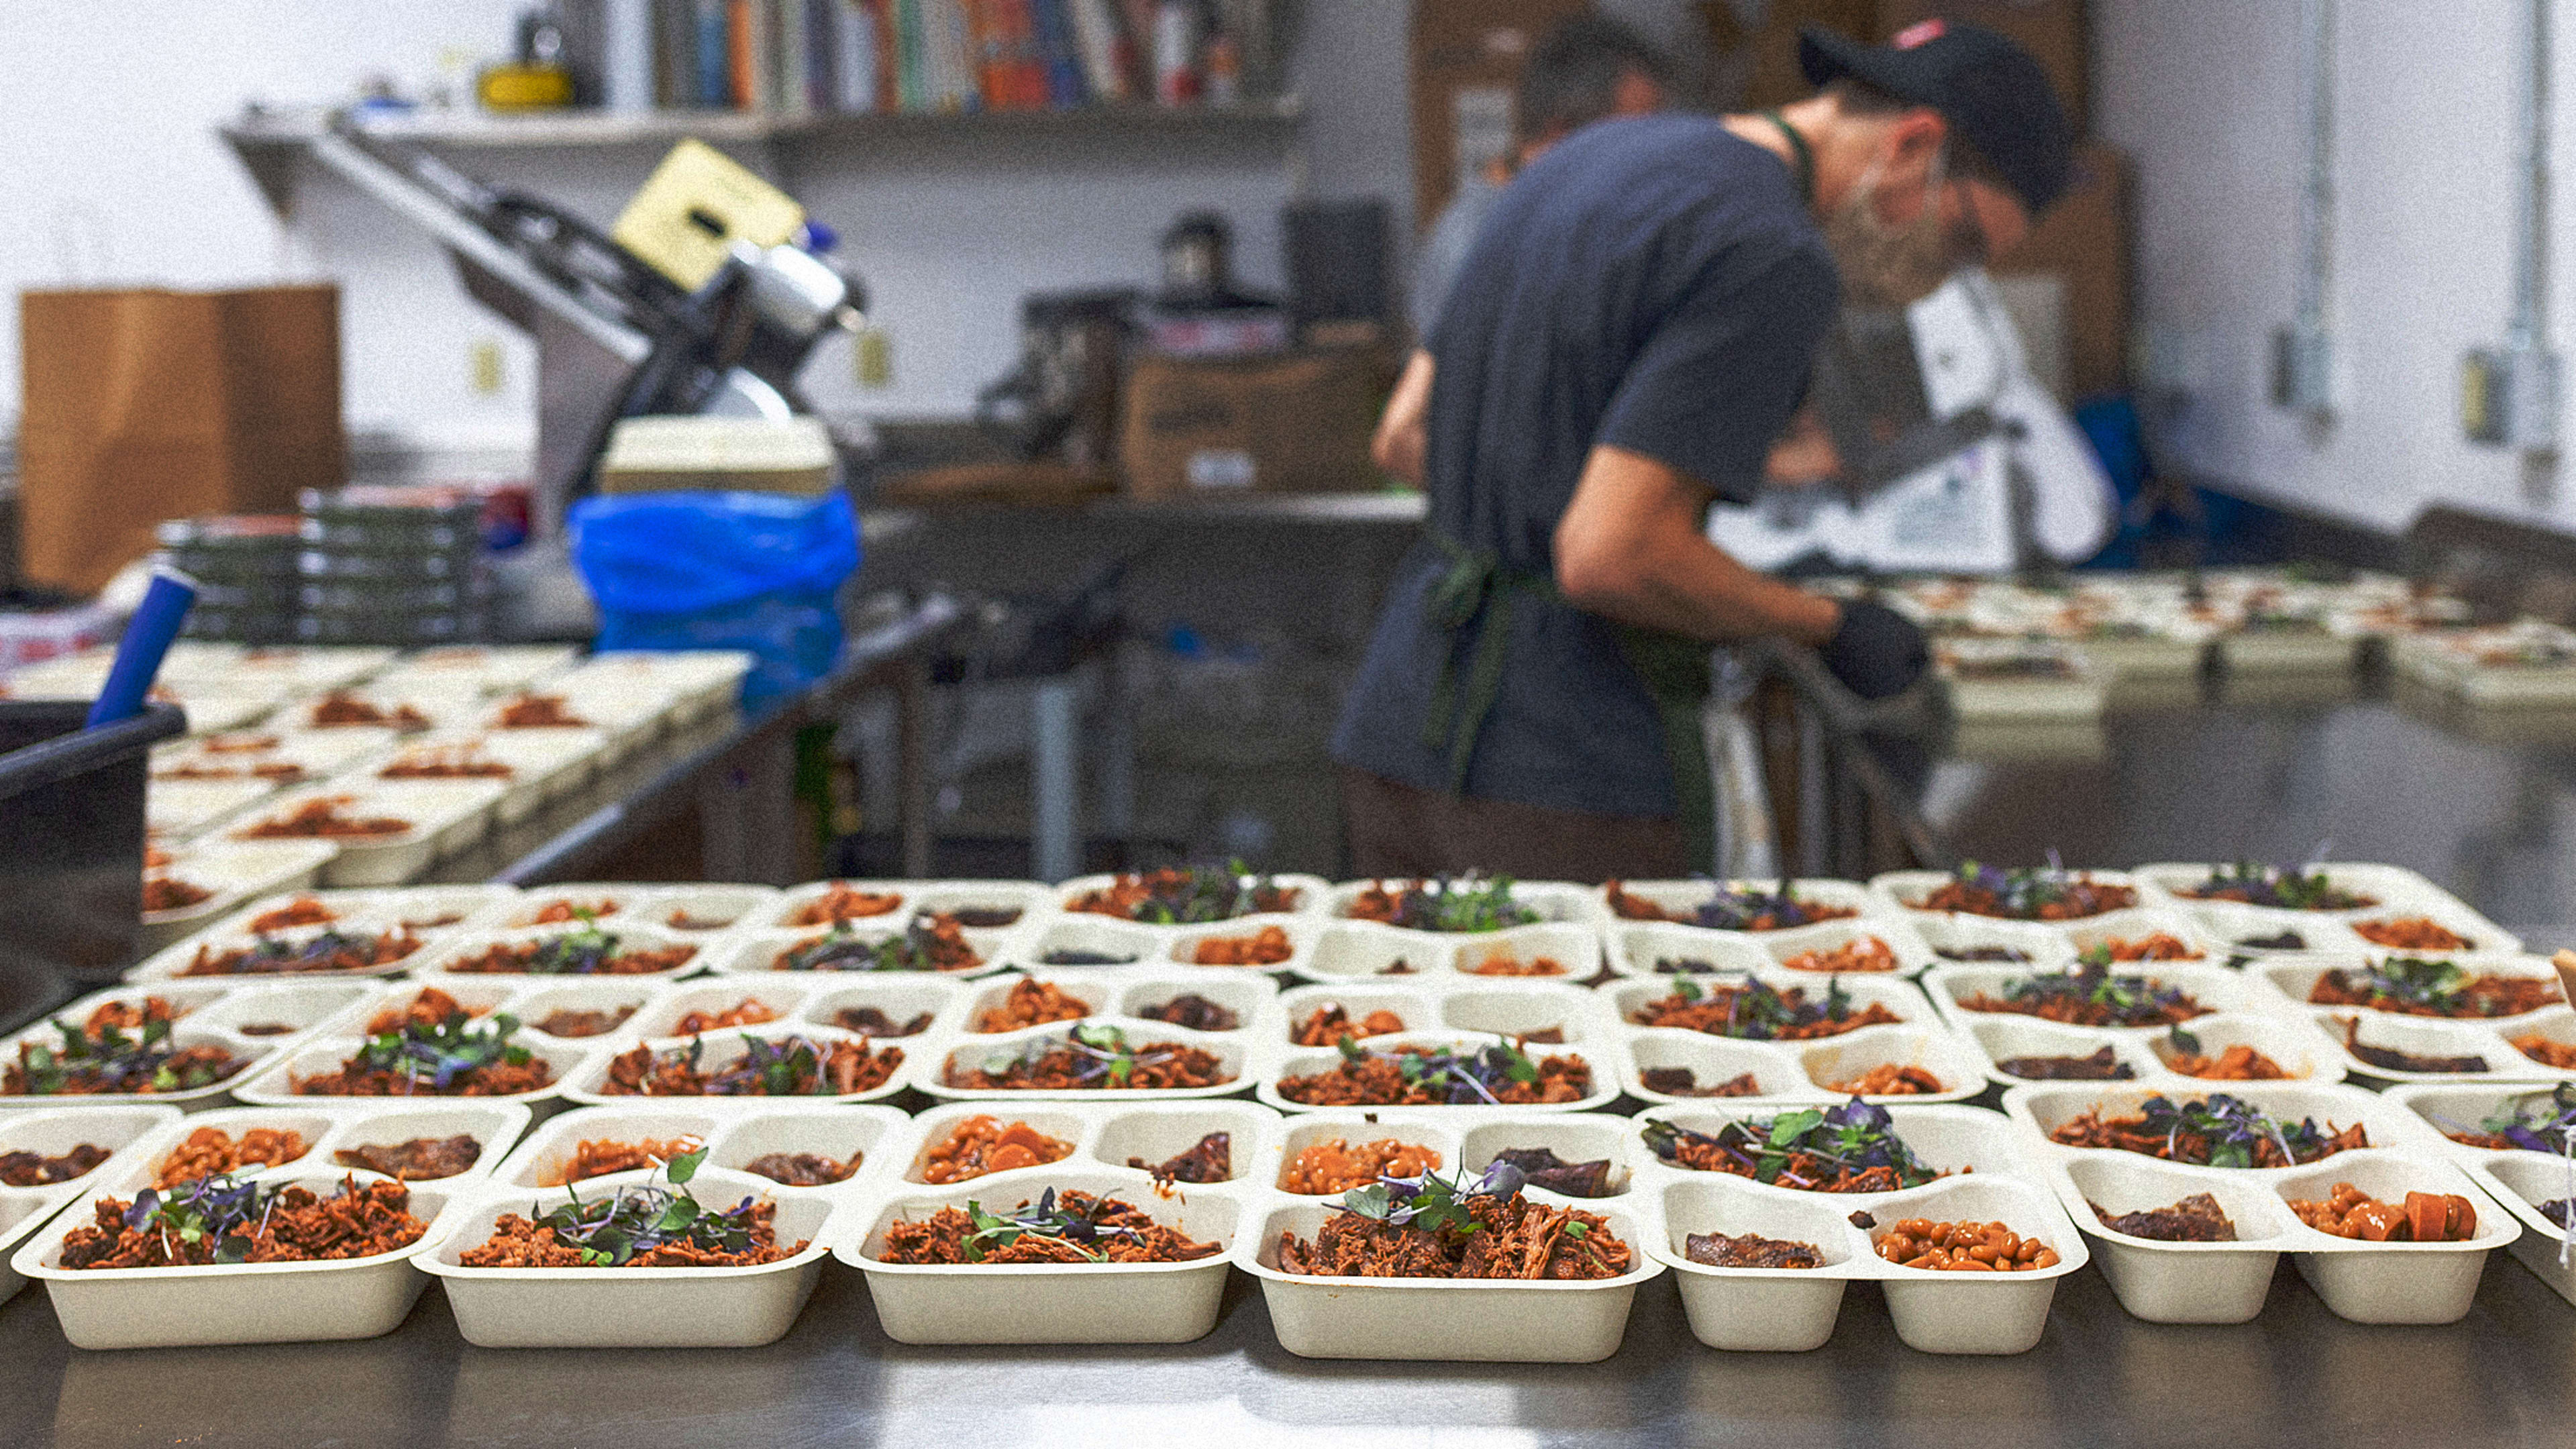 ‘Zero waste’ often doesn’t actually mean zero. Not so in this Pittsburgh kitchen